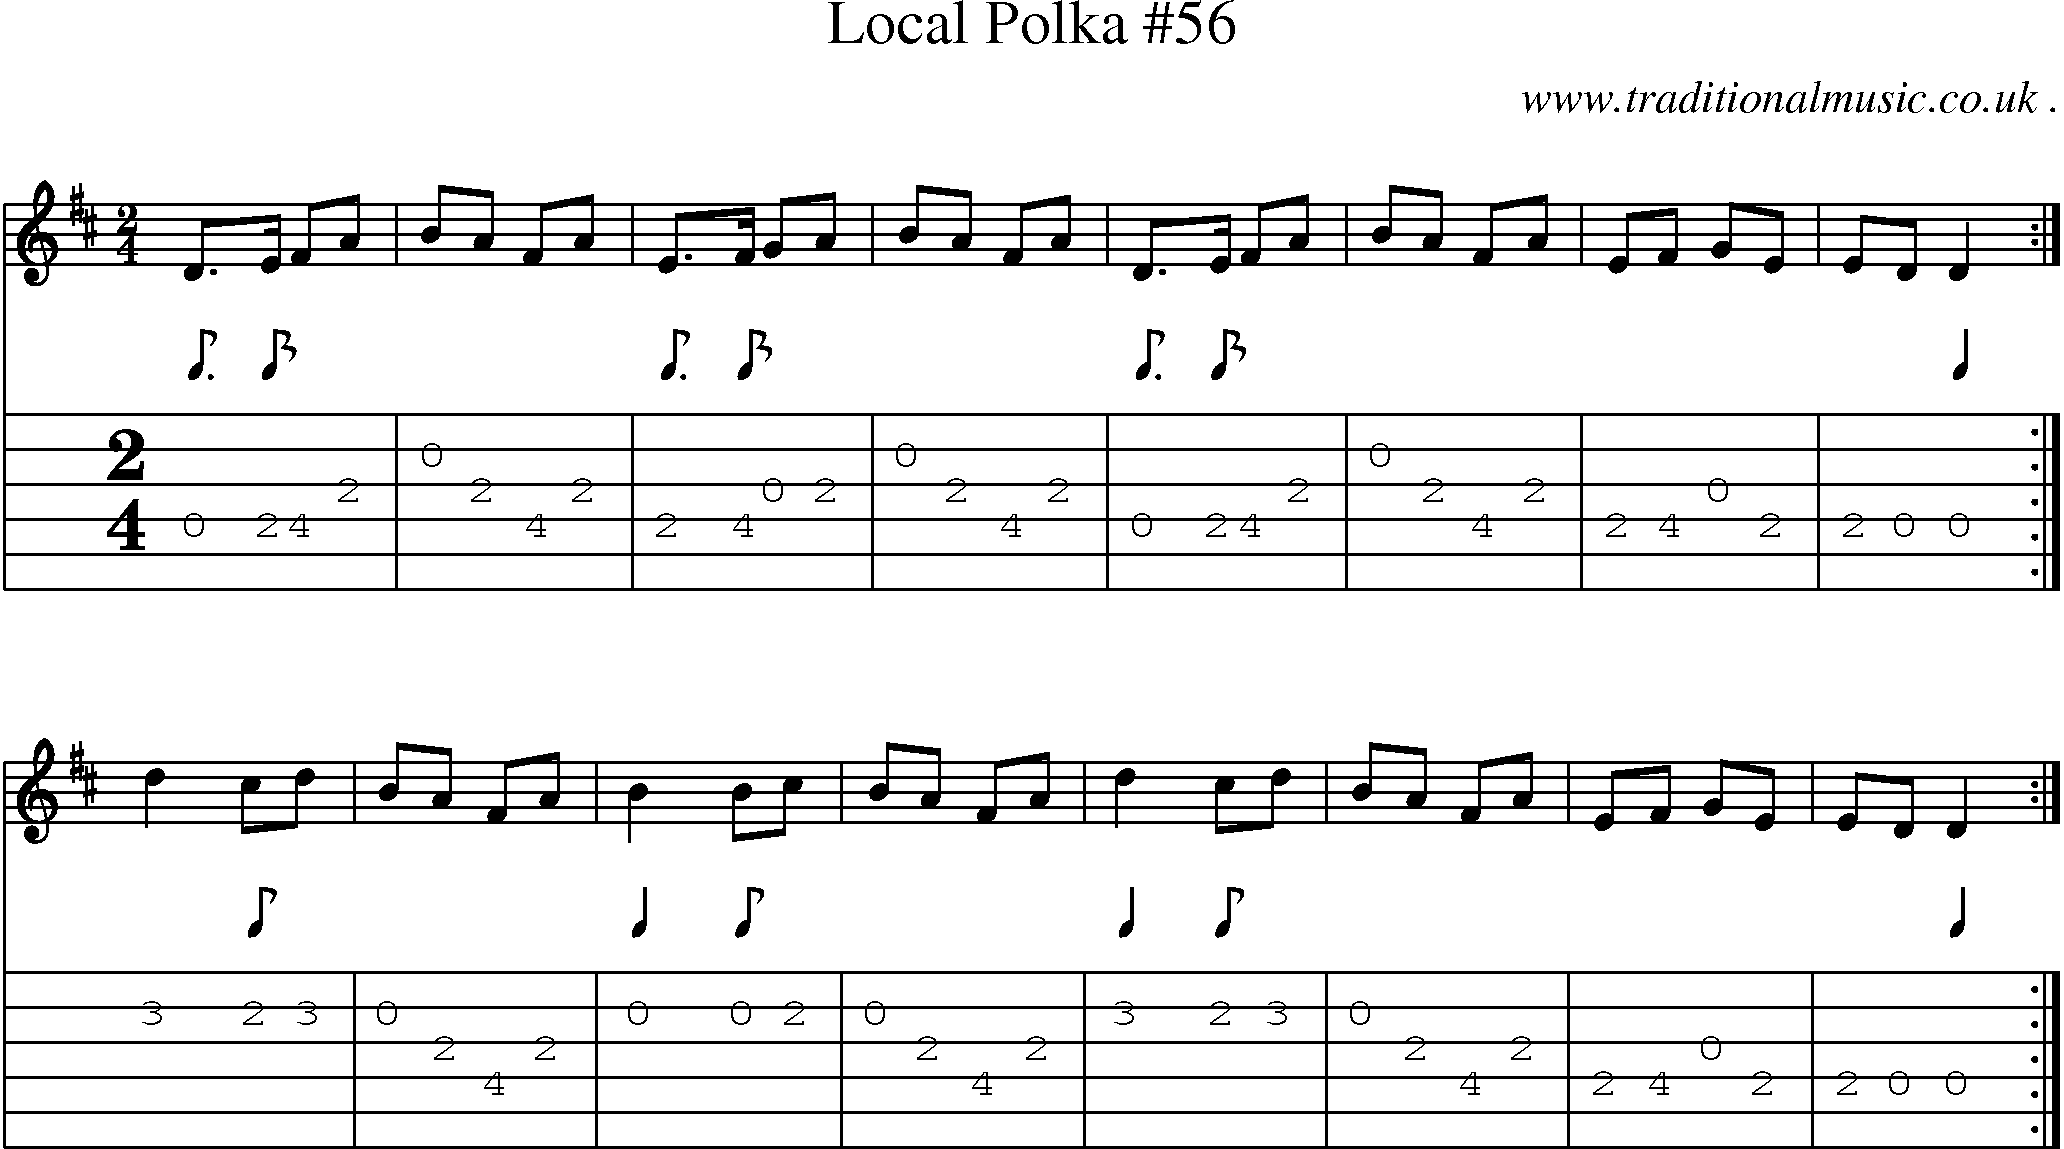 Sheet-music  score, Chords and Guitar Tabs for Local Polka 56